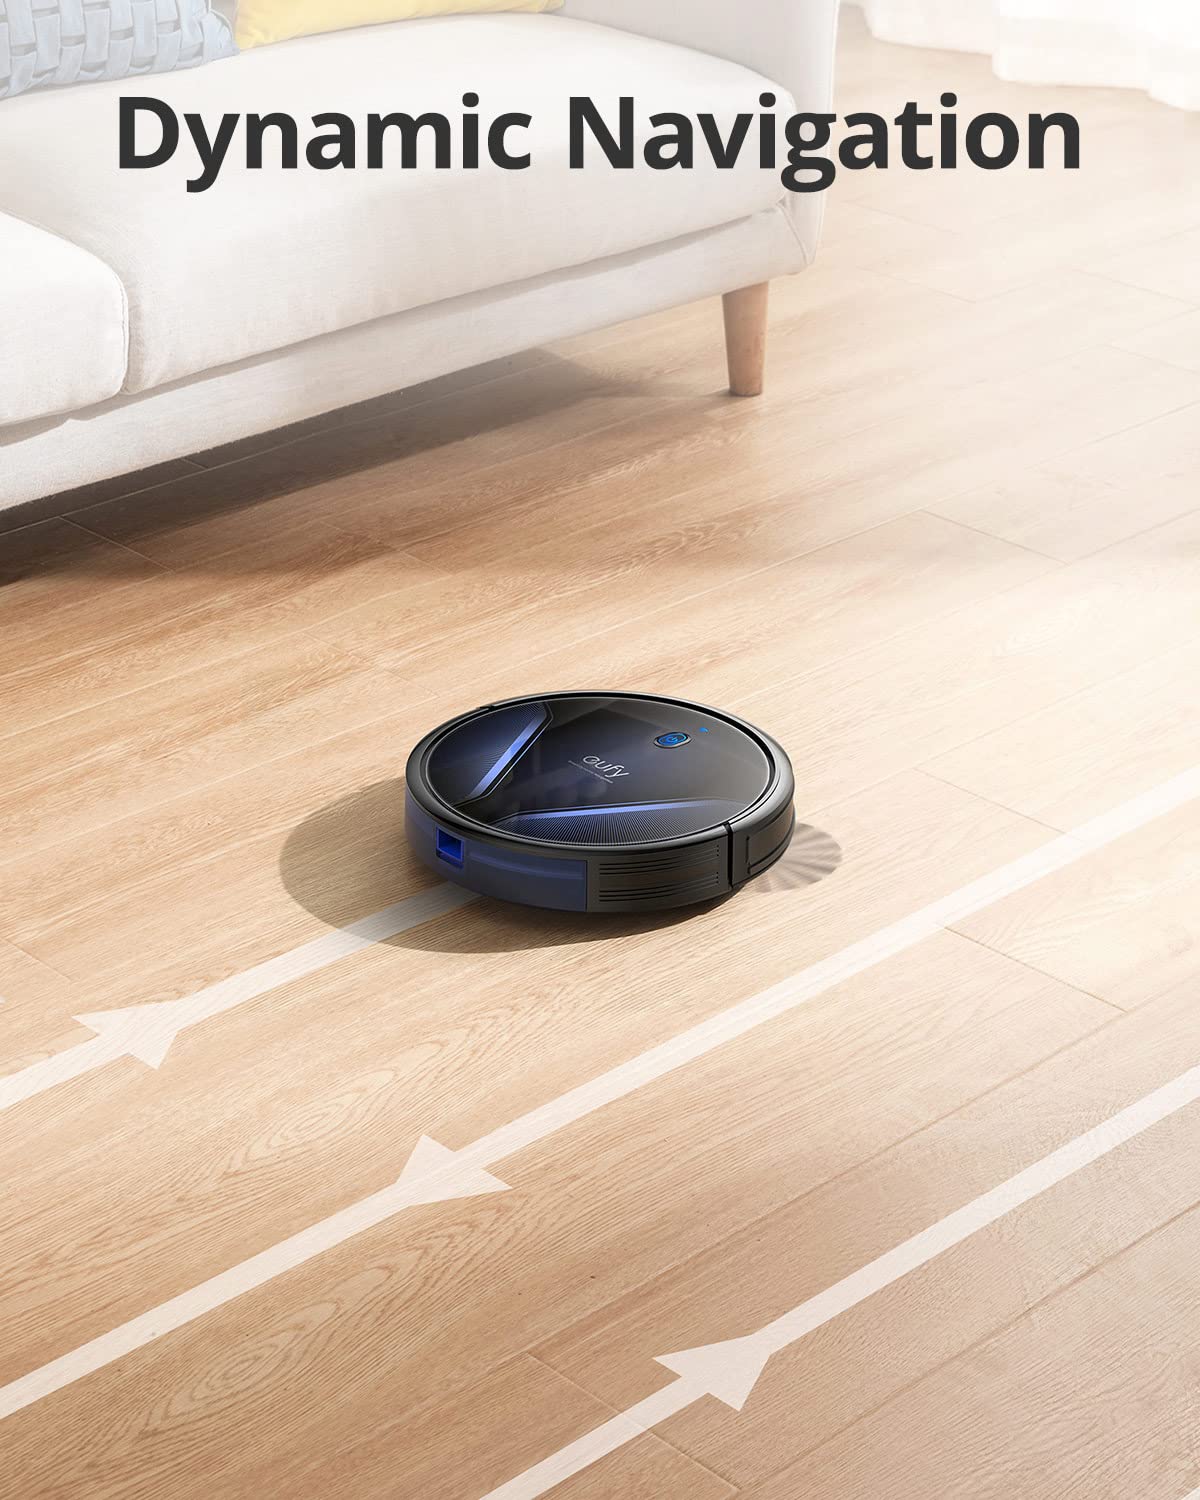 Eufy by Anker, Robovac G20, Robot Vacuum, Dynamic Navigation, 2500 Pa Strong Suction, Ultra-Slim, App, Voice Control, Compatible with Alexa, Ideal for Hard Floors & Pet Hair, Black